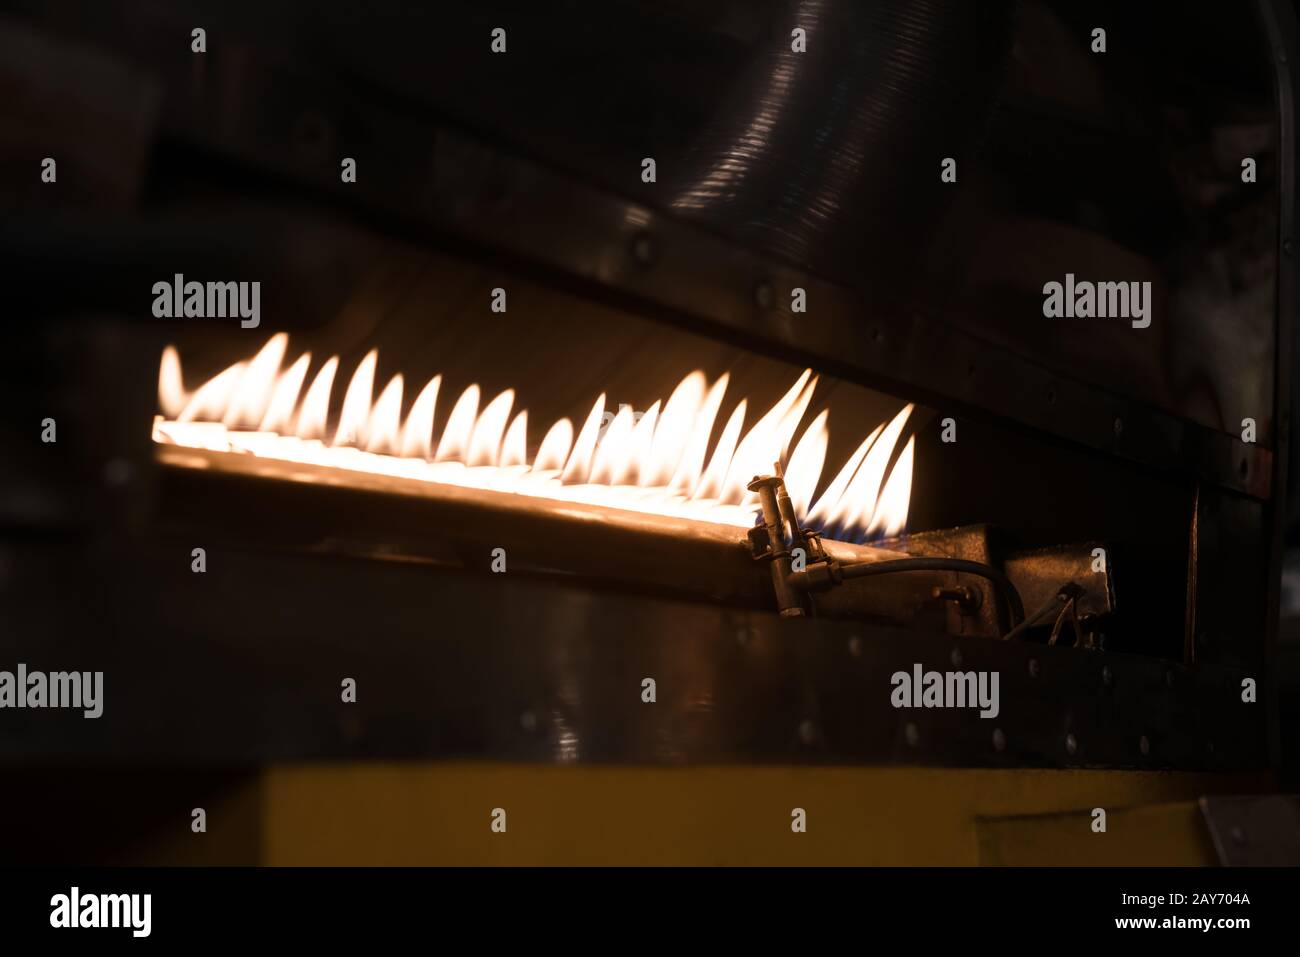 https://c8.alamy.com/comp/2AY704A/oven-of-roaster-with-burning-fire-2AY704A.jpg